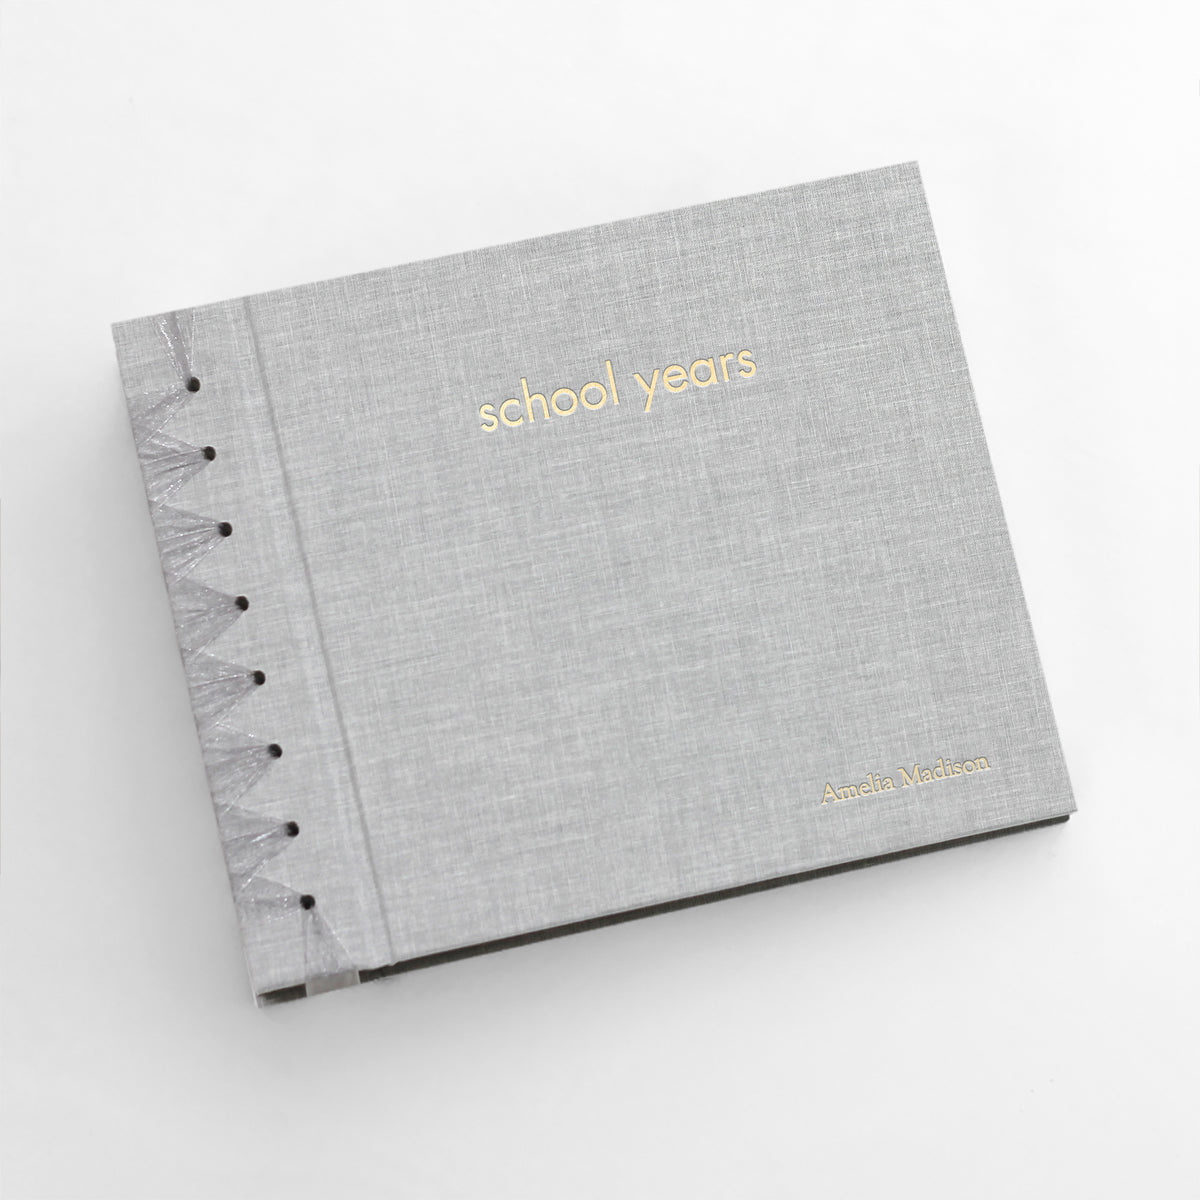 School Years with Dove Gray Cotton Cover